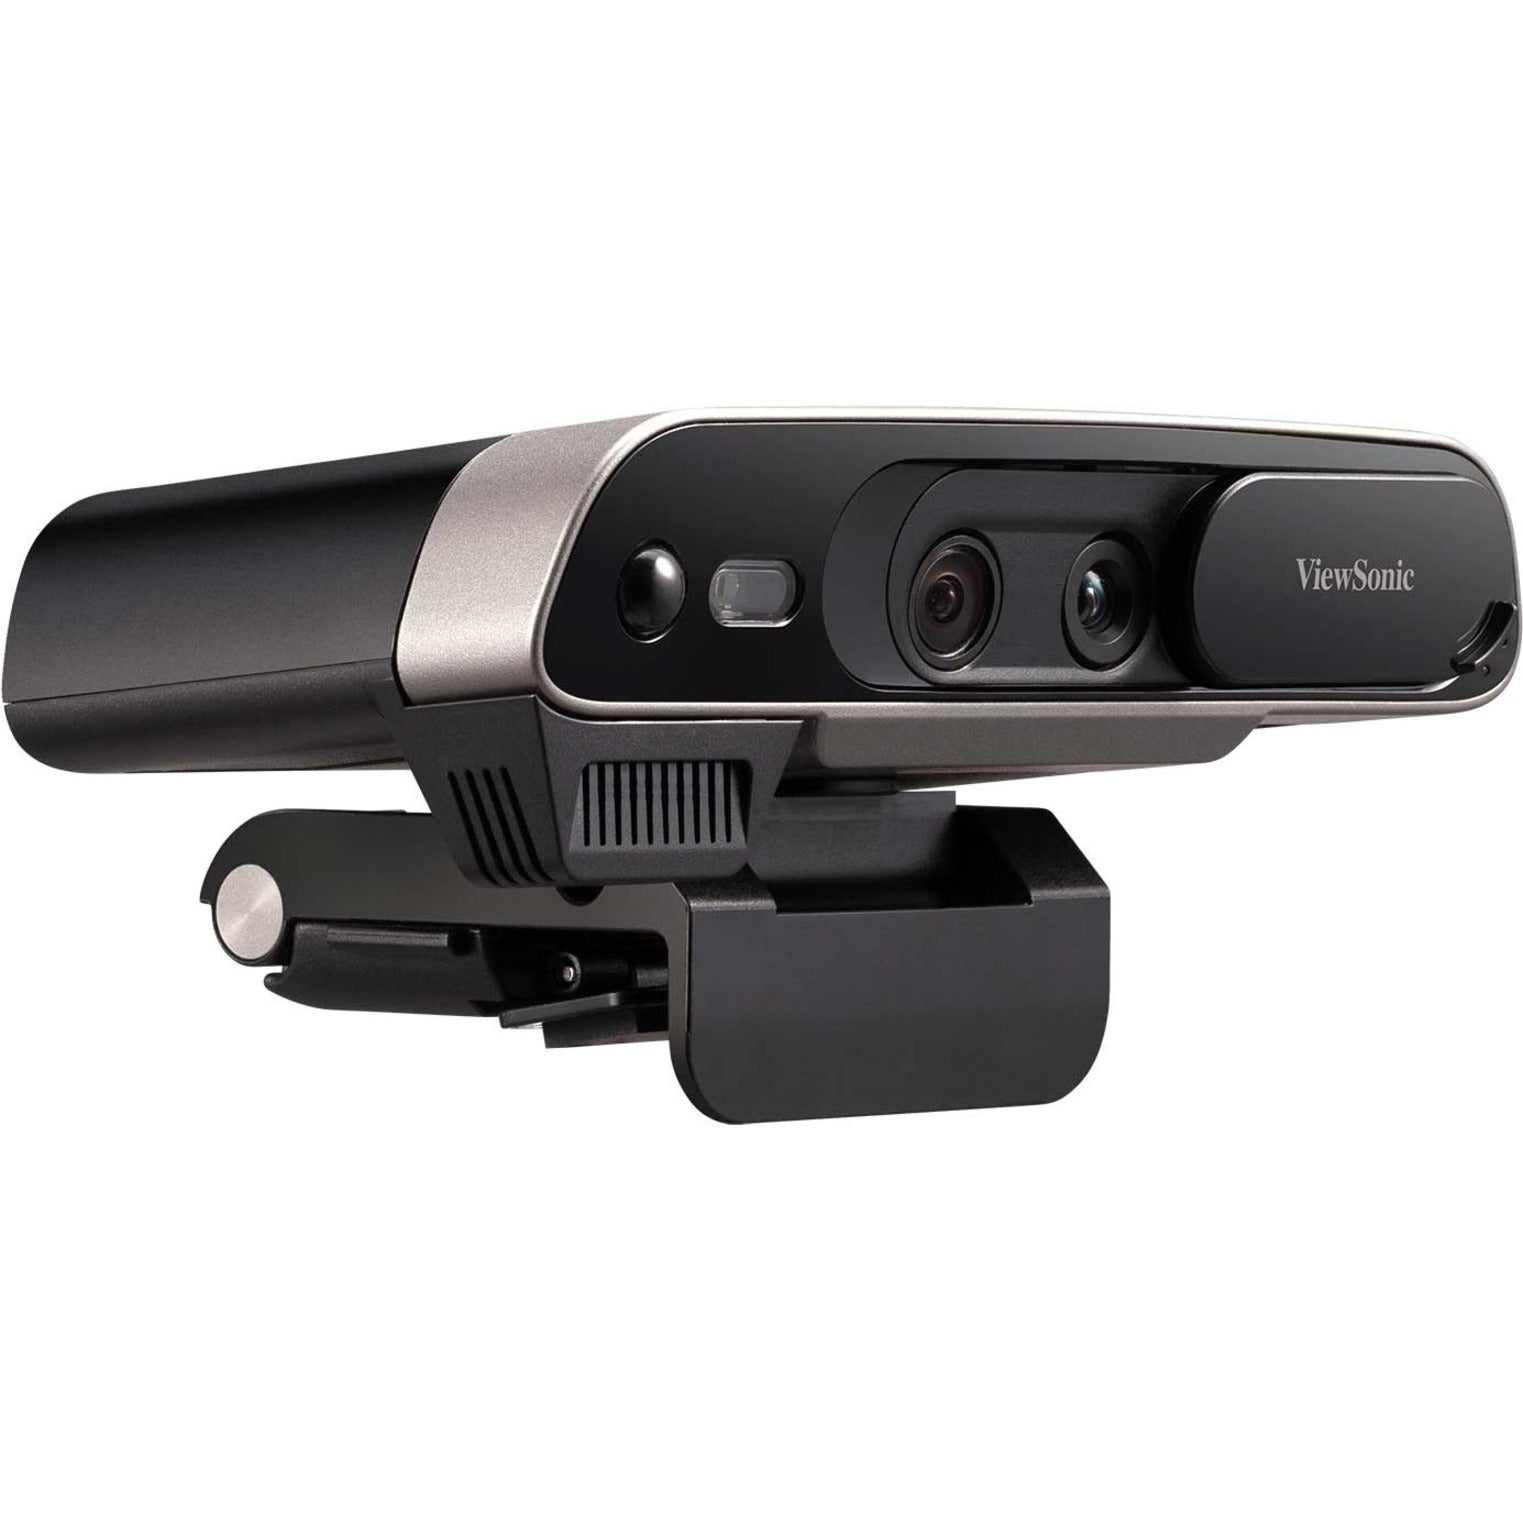 ViewSonic VBC100 4K Data Collection Camera, USB 3.0 Type C, HDMI Out, Built-in Microphone